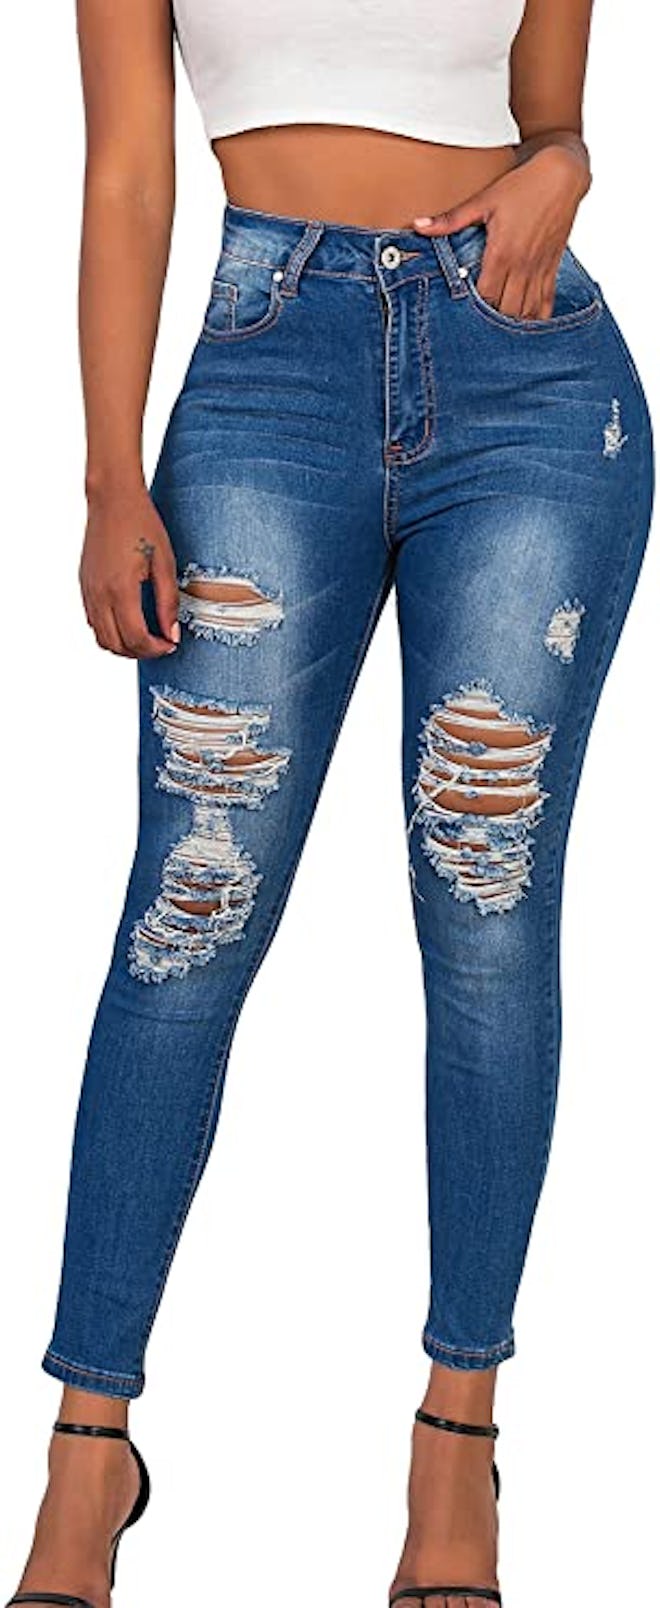 MEISITE High-Rise Brazilian Style Skinny Jeans 